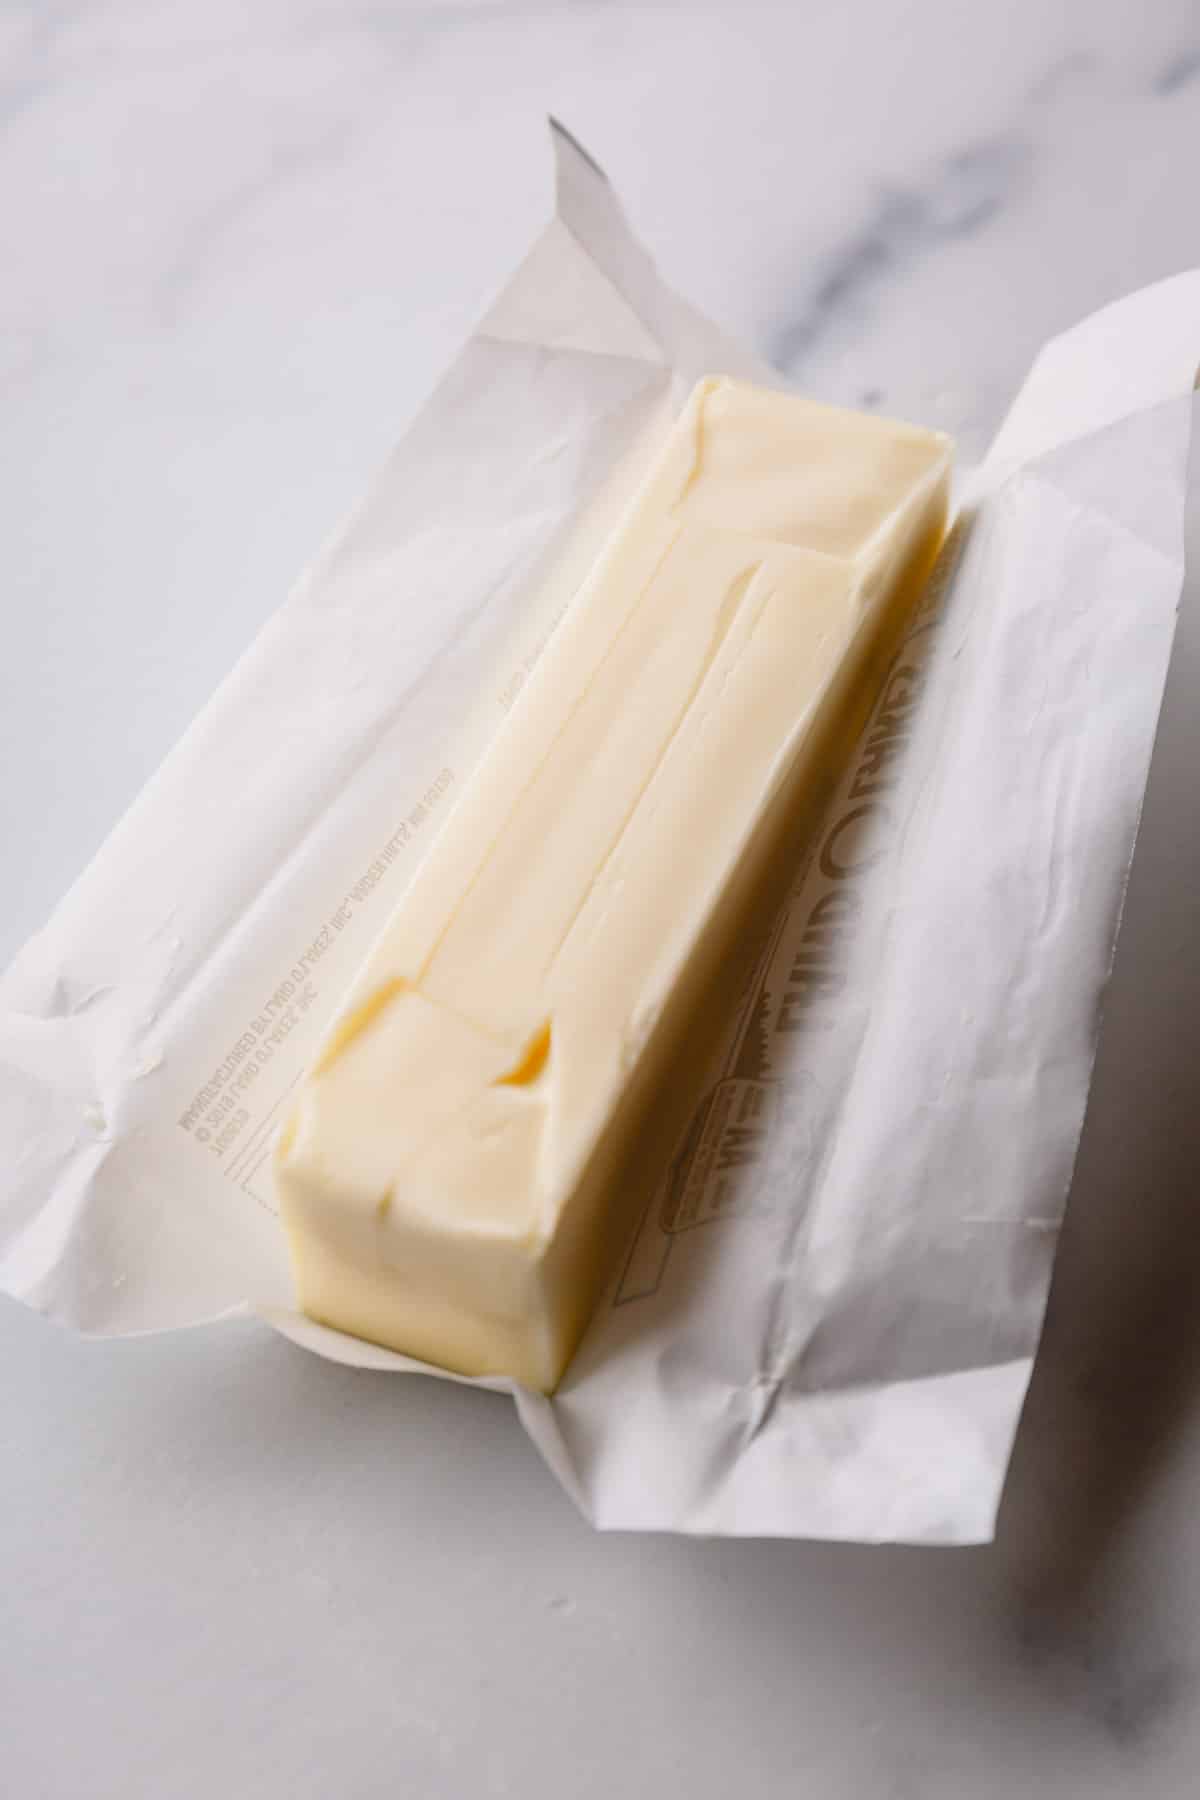 A stick of unwrapped butter.